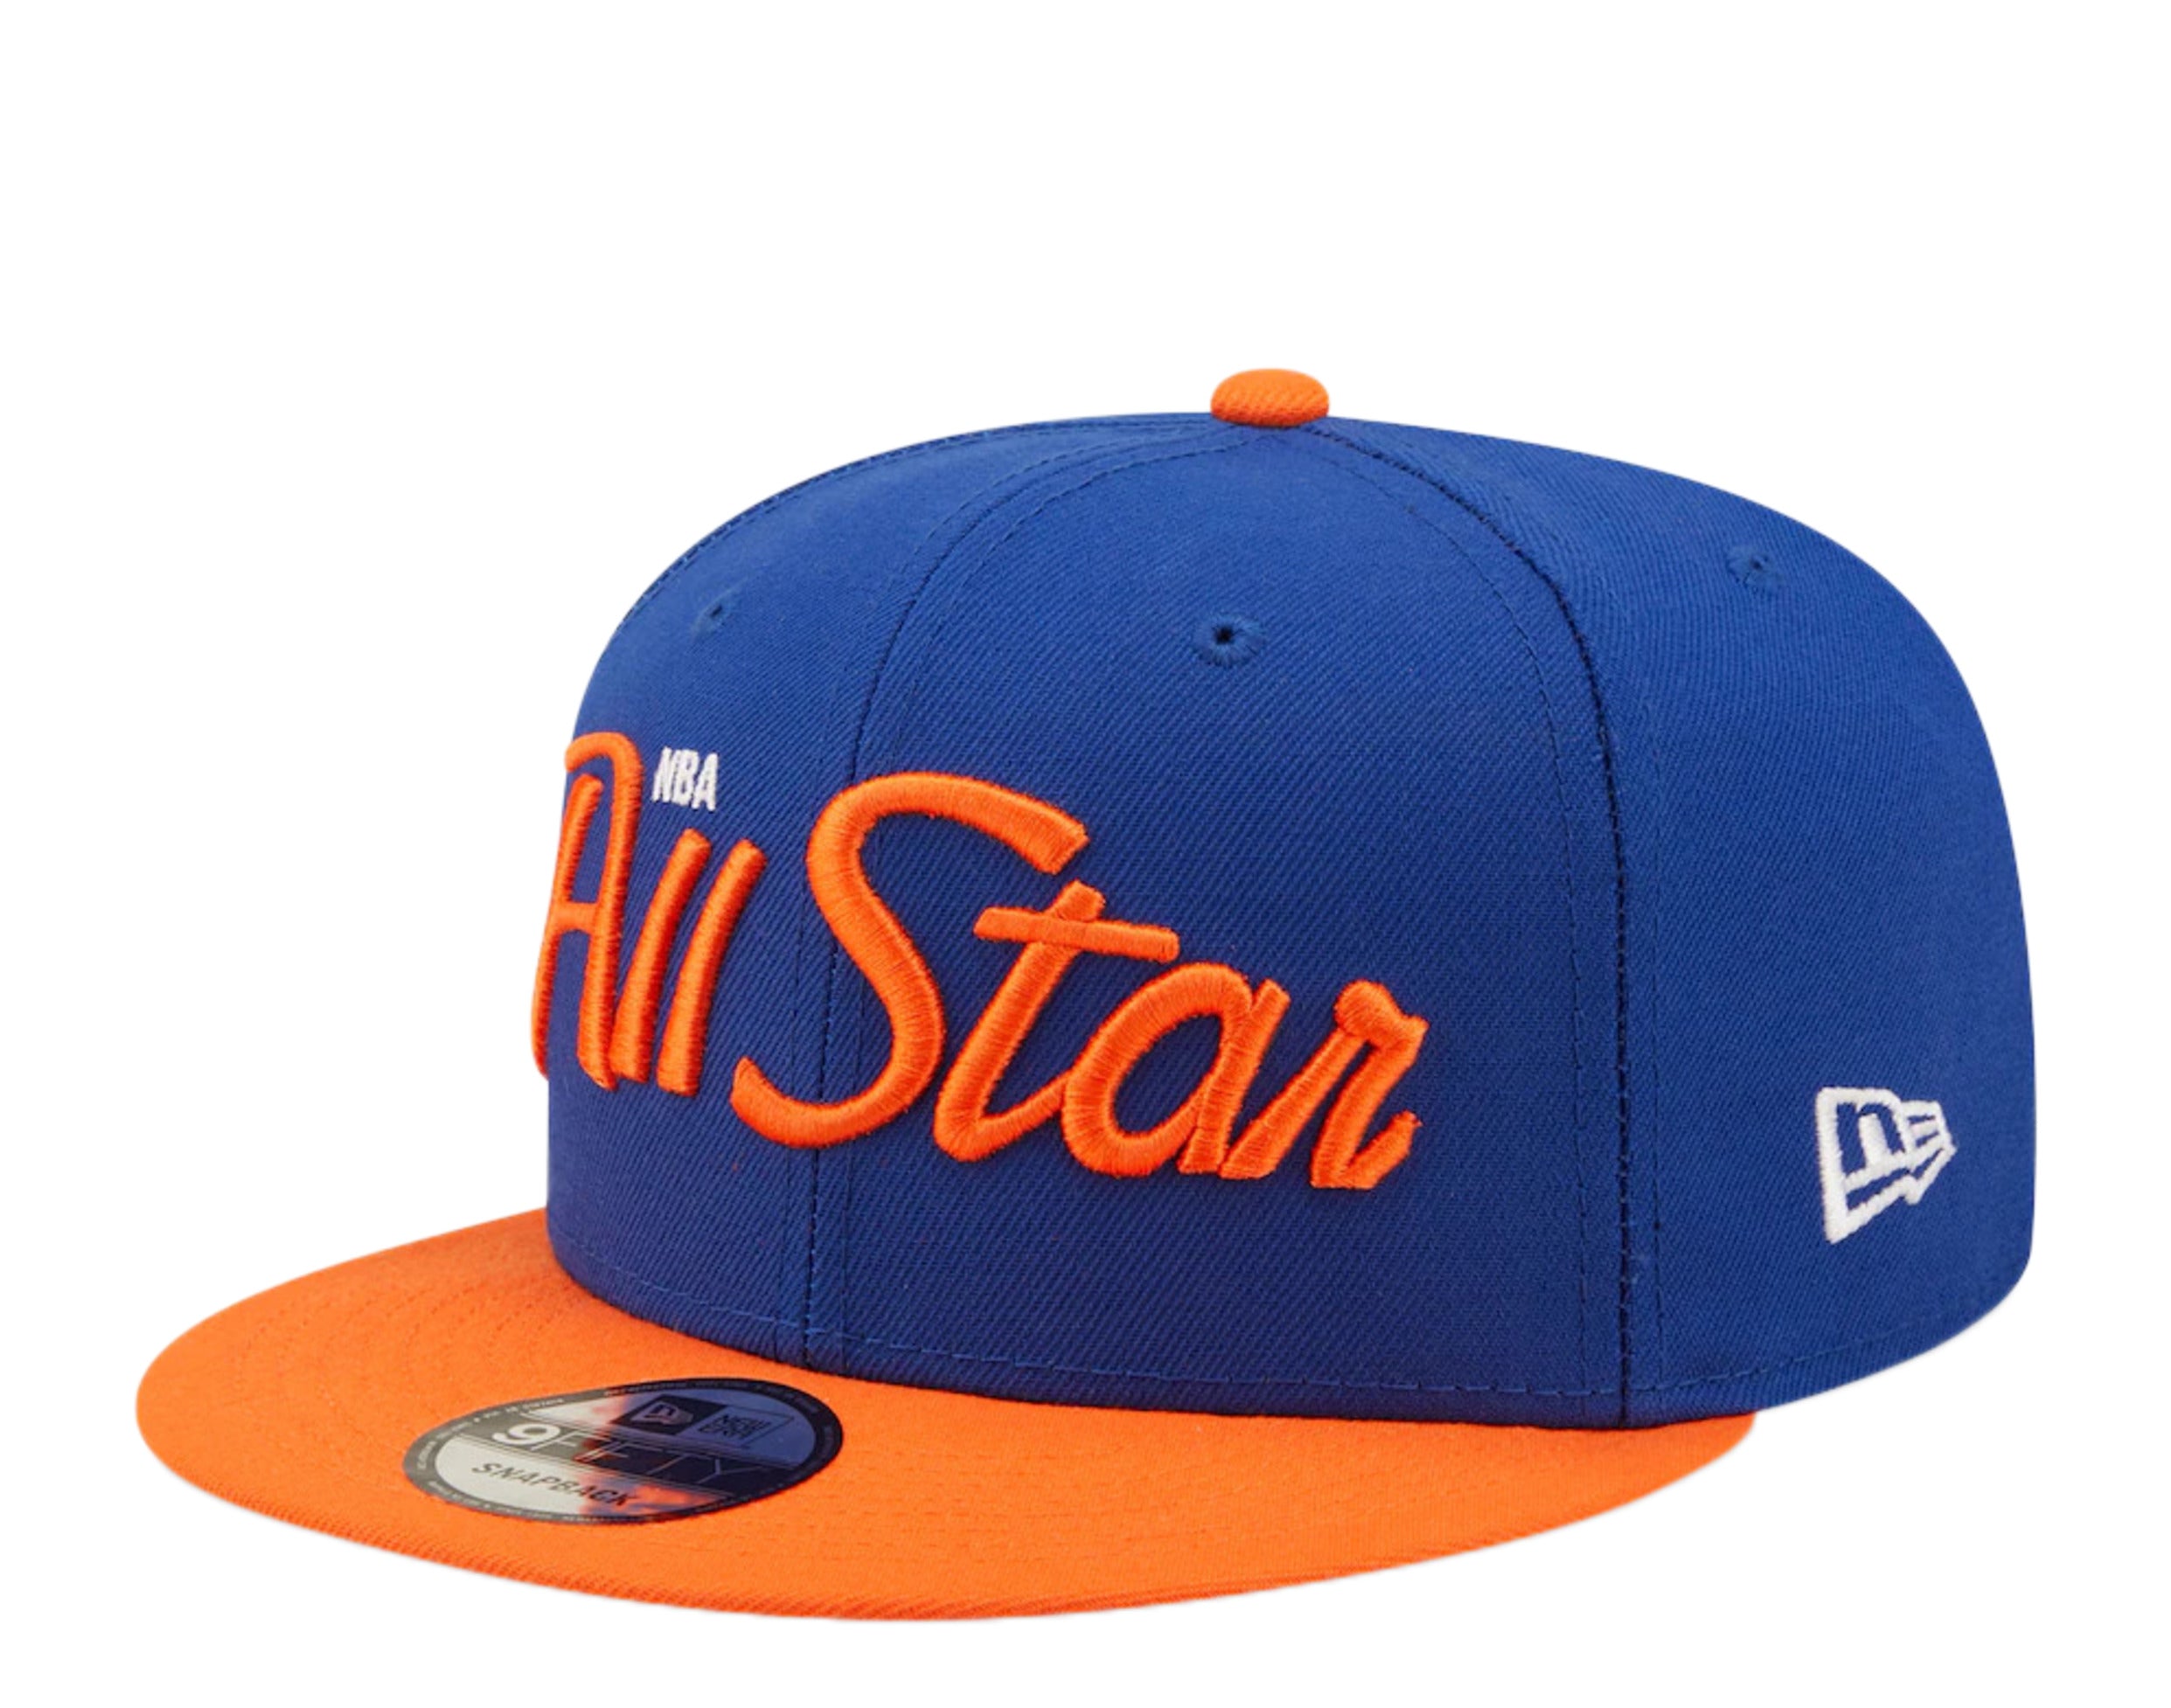 New York Knicks All-Star Game NBA Jerseys for sale